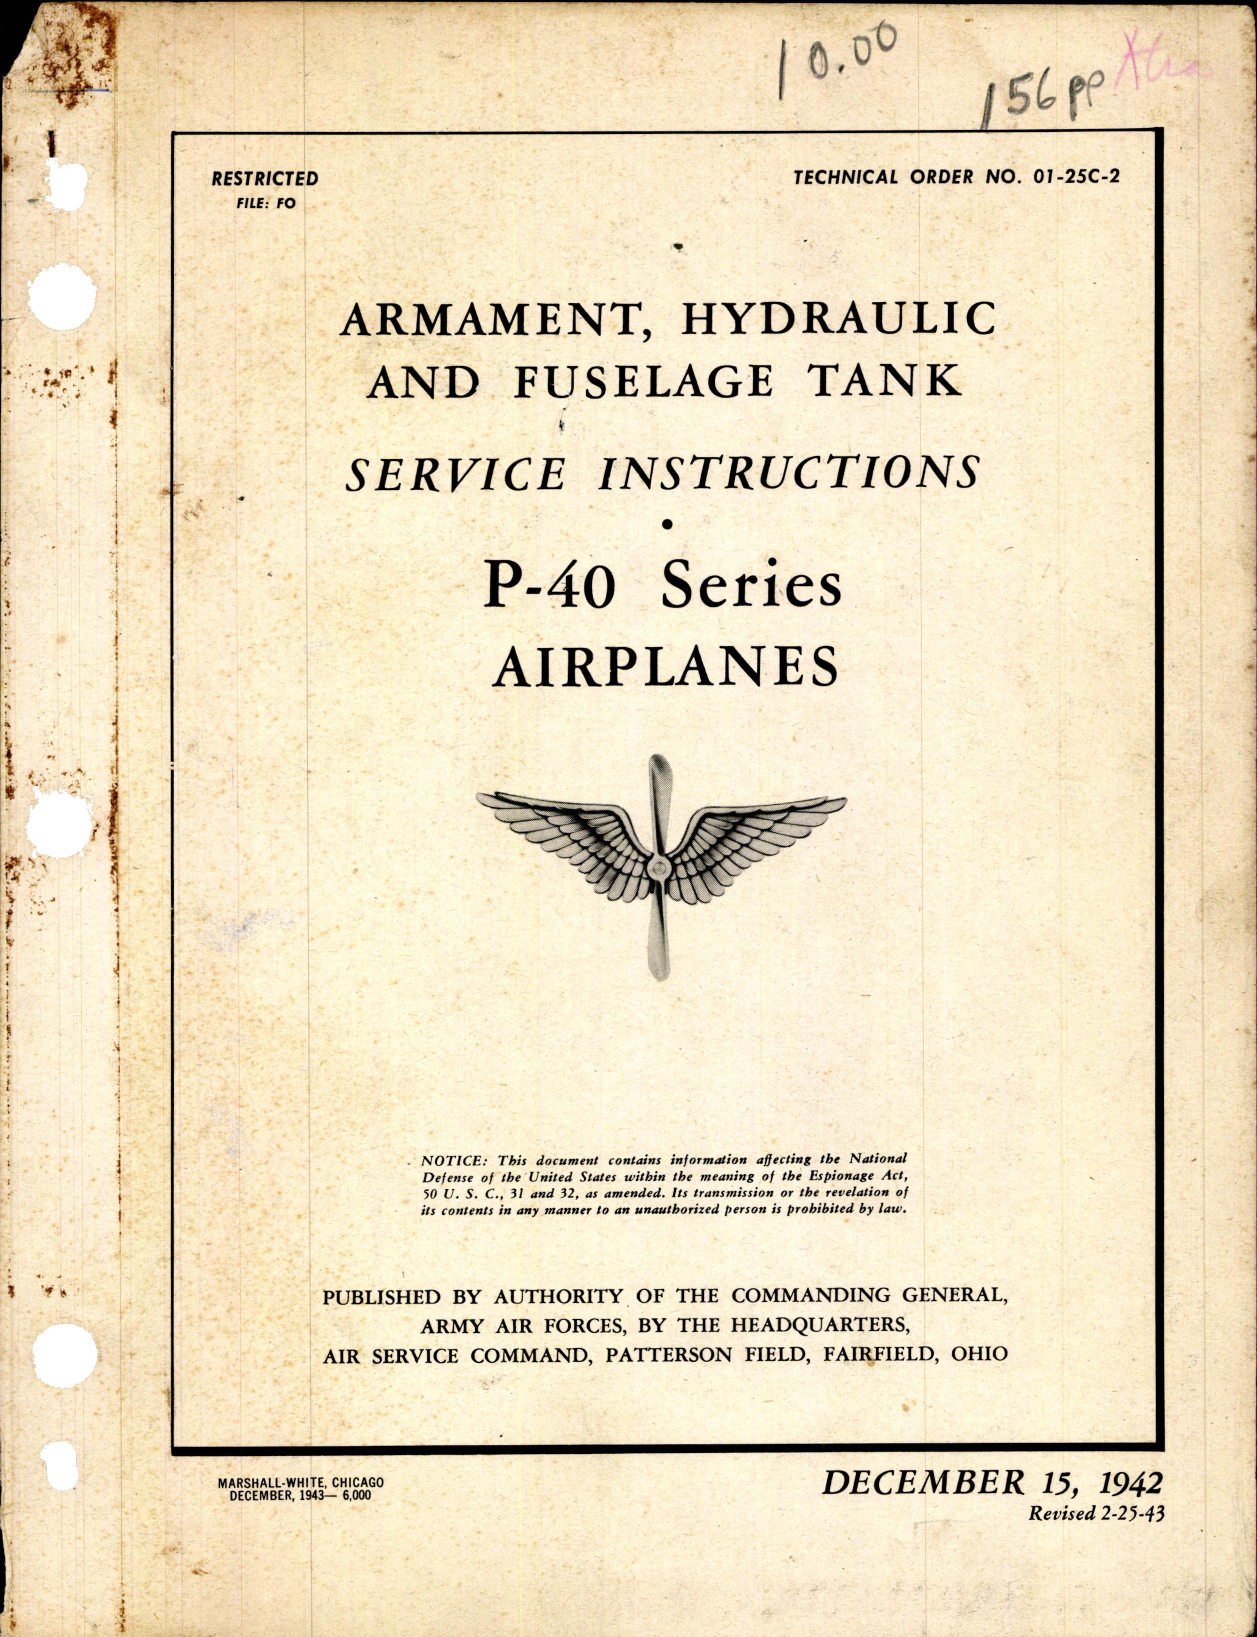 Sample page 1 from AirCorps Library document: Armament, Hydraulic & Fuselage Tank Service Instructions for P-40 Series